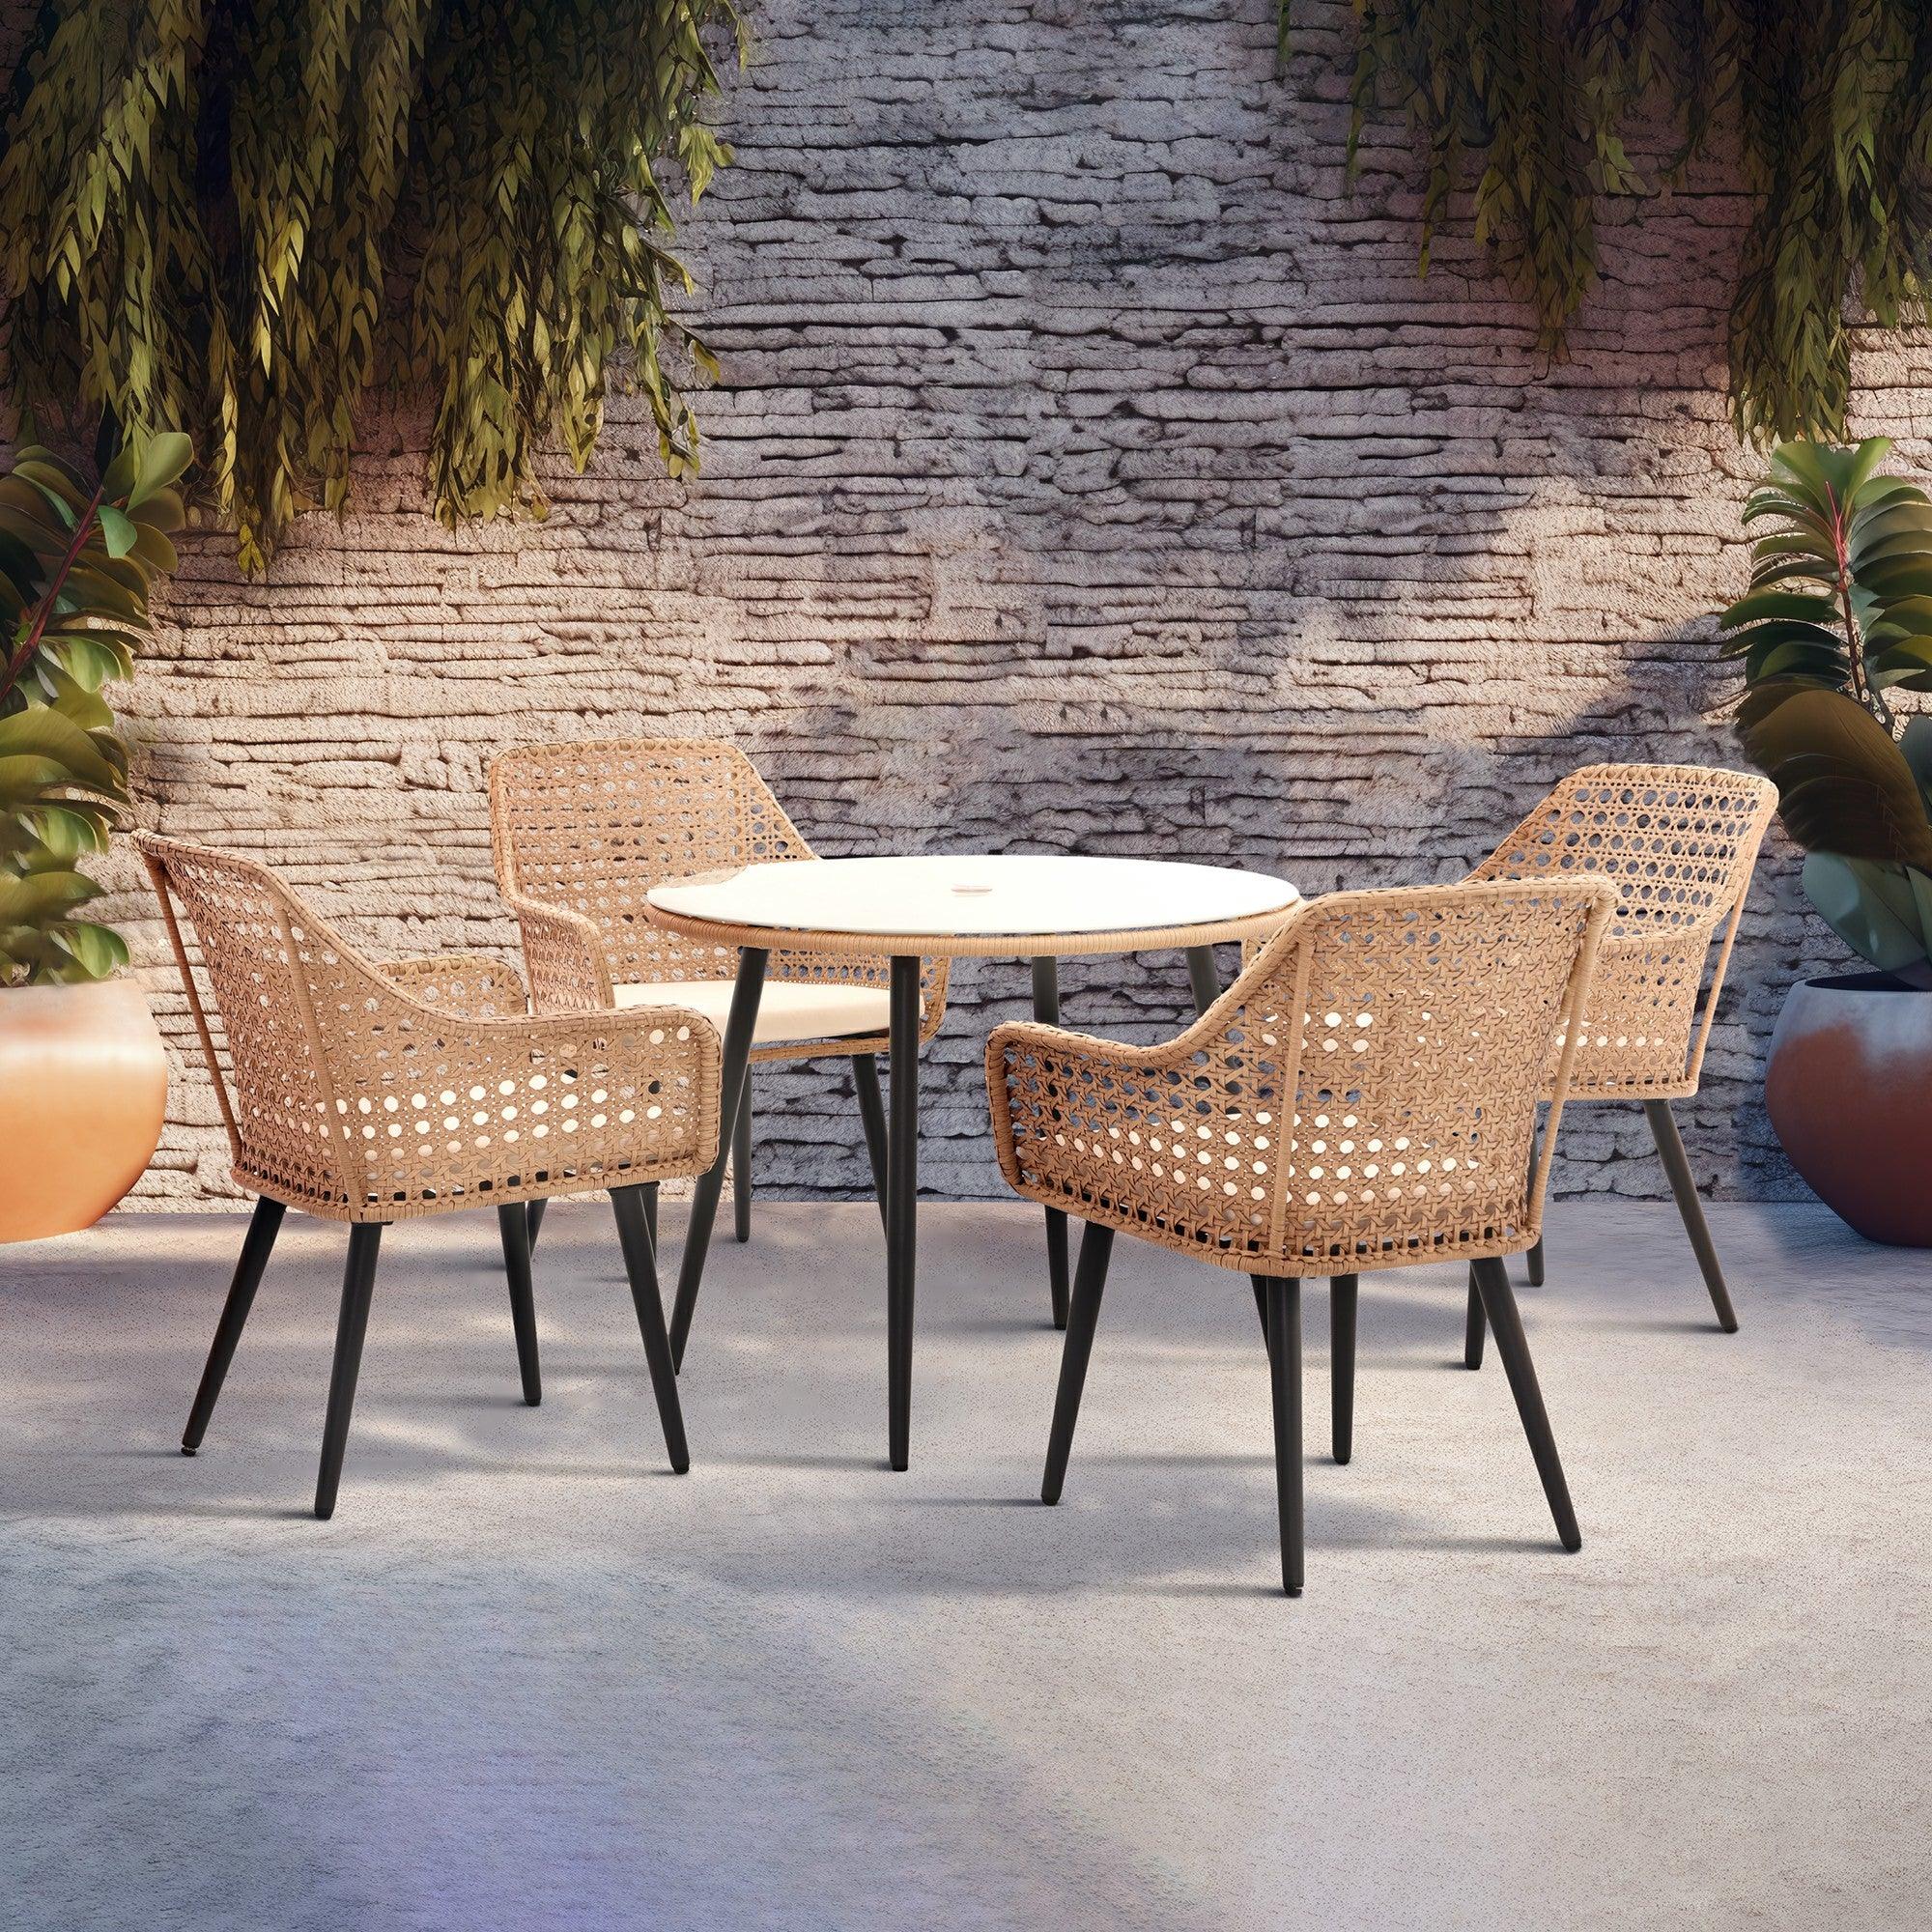 Menorca 5-Piece Wicker Dining Set with aluminum frame, white cushions, Round Dining Table with Tempered Glass and umbrella hole, on the deck, beside the wall- Jardina Furniture